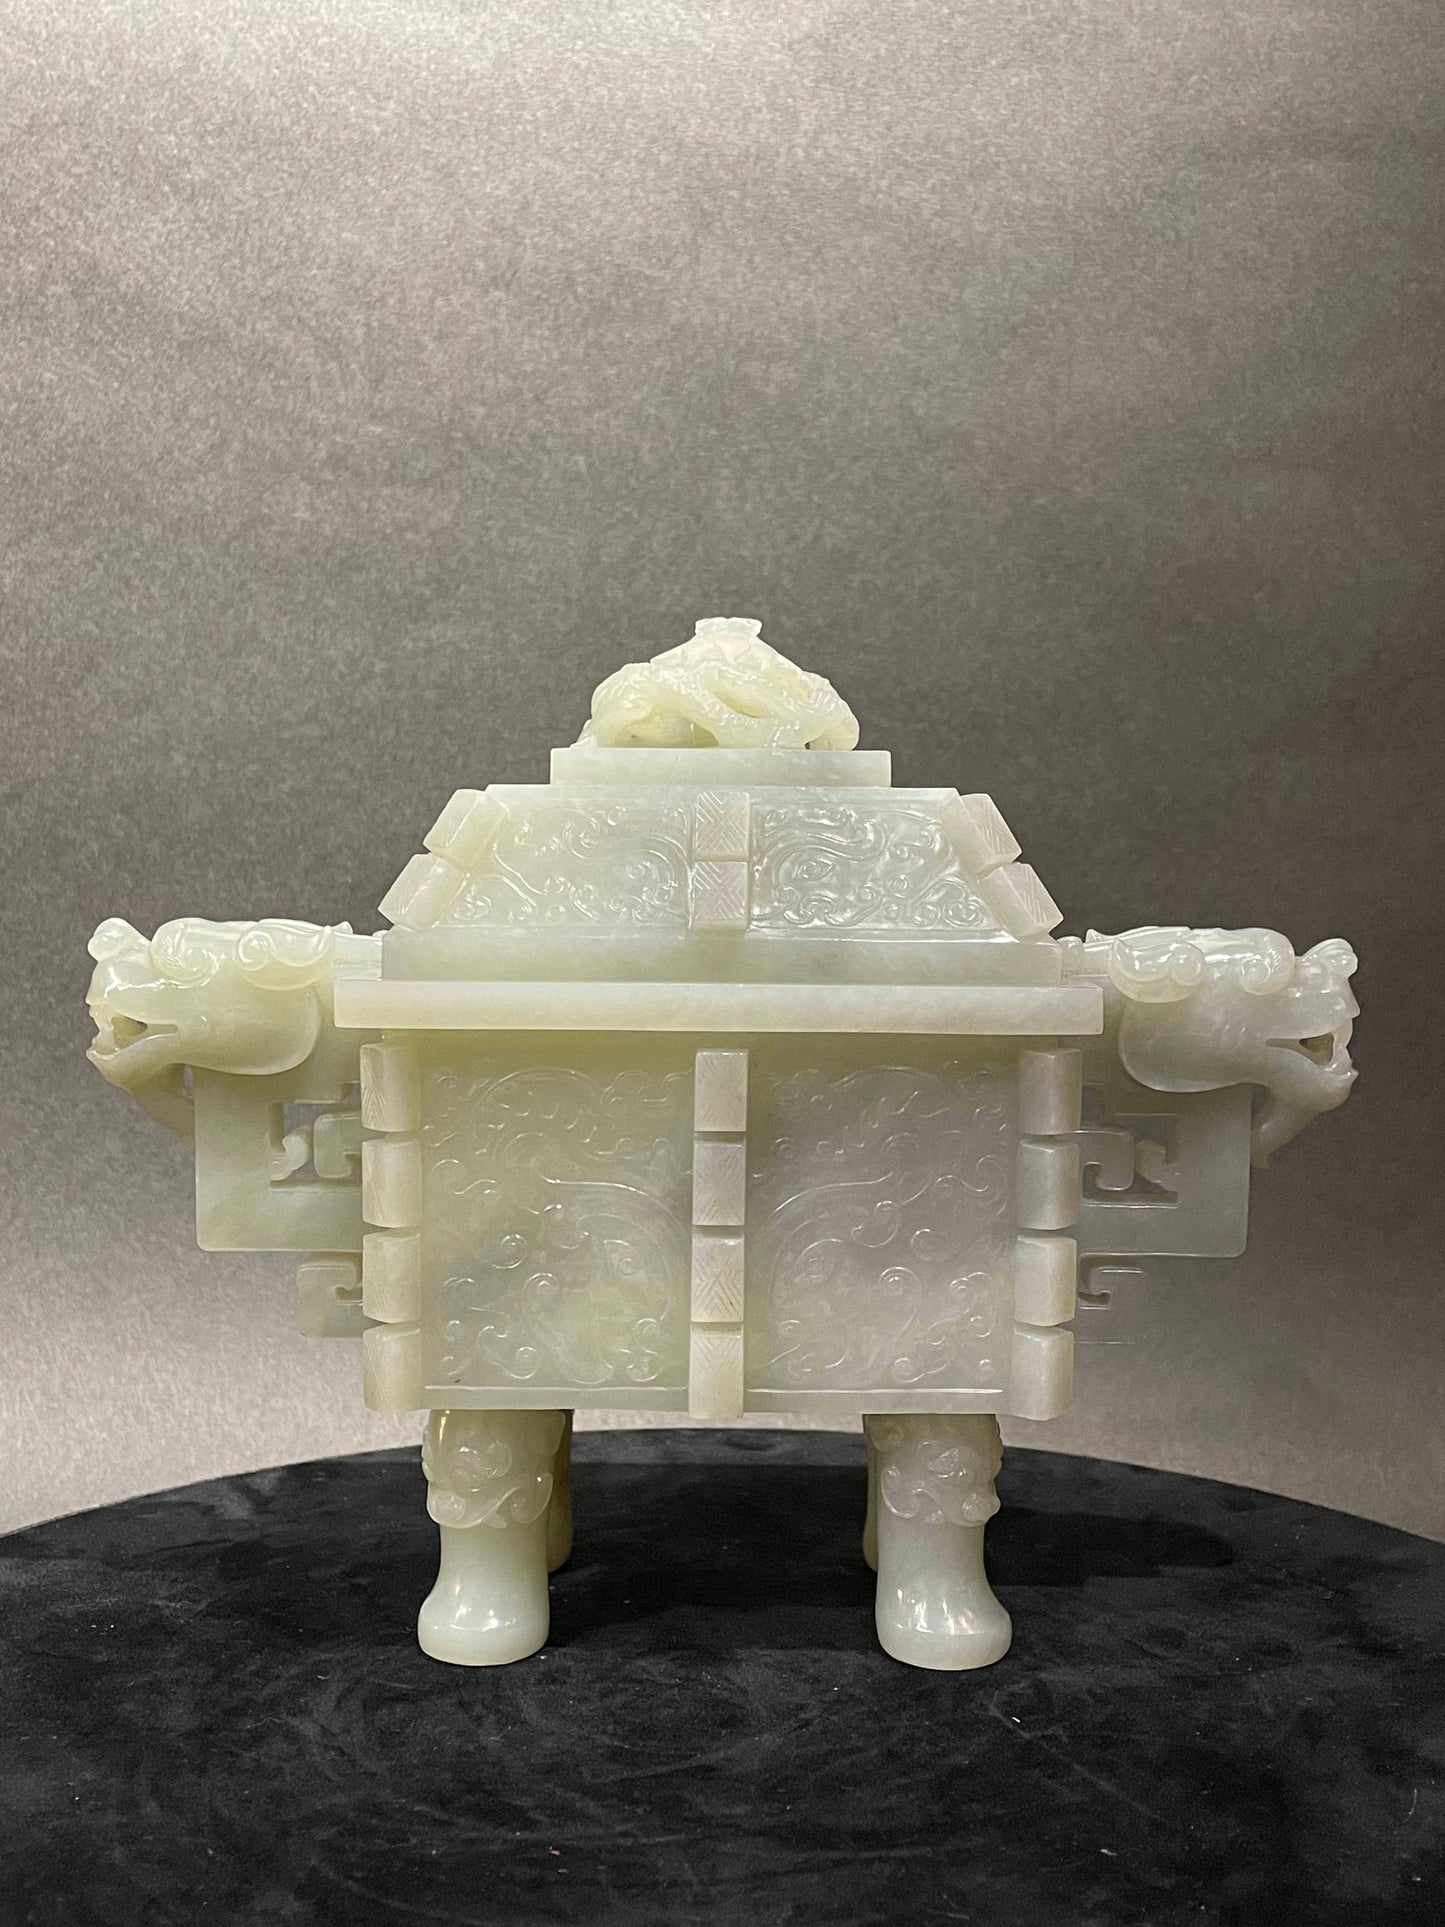 A Pale Celadon Jade 'Beast' Censer & Cover, Qing Dynasty